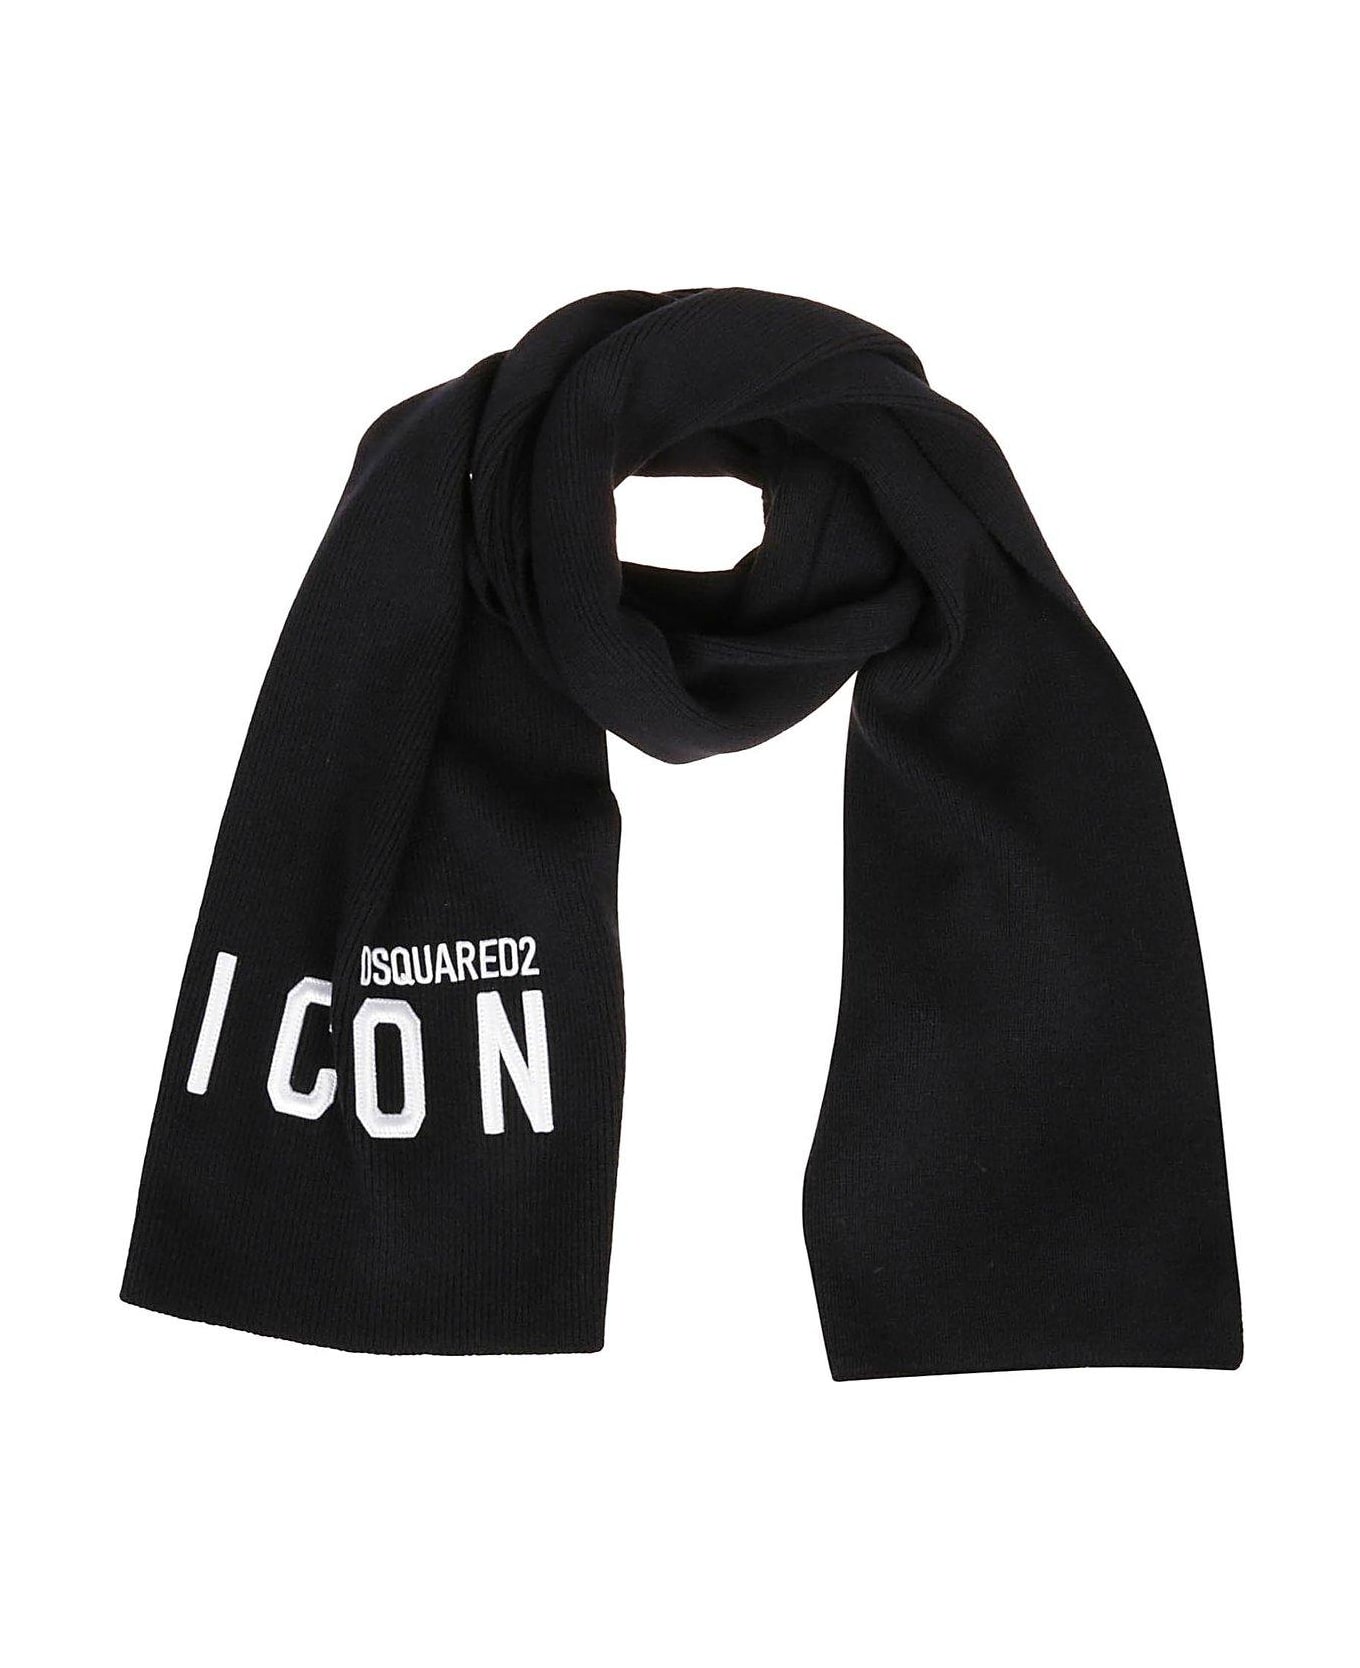 Dsquared2 'icon' Wool Scarf